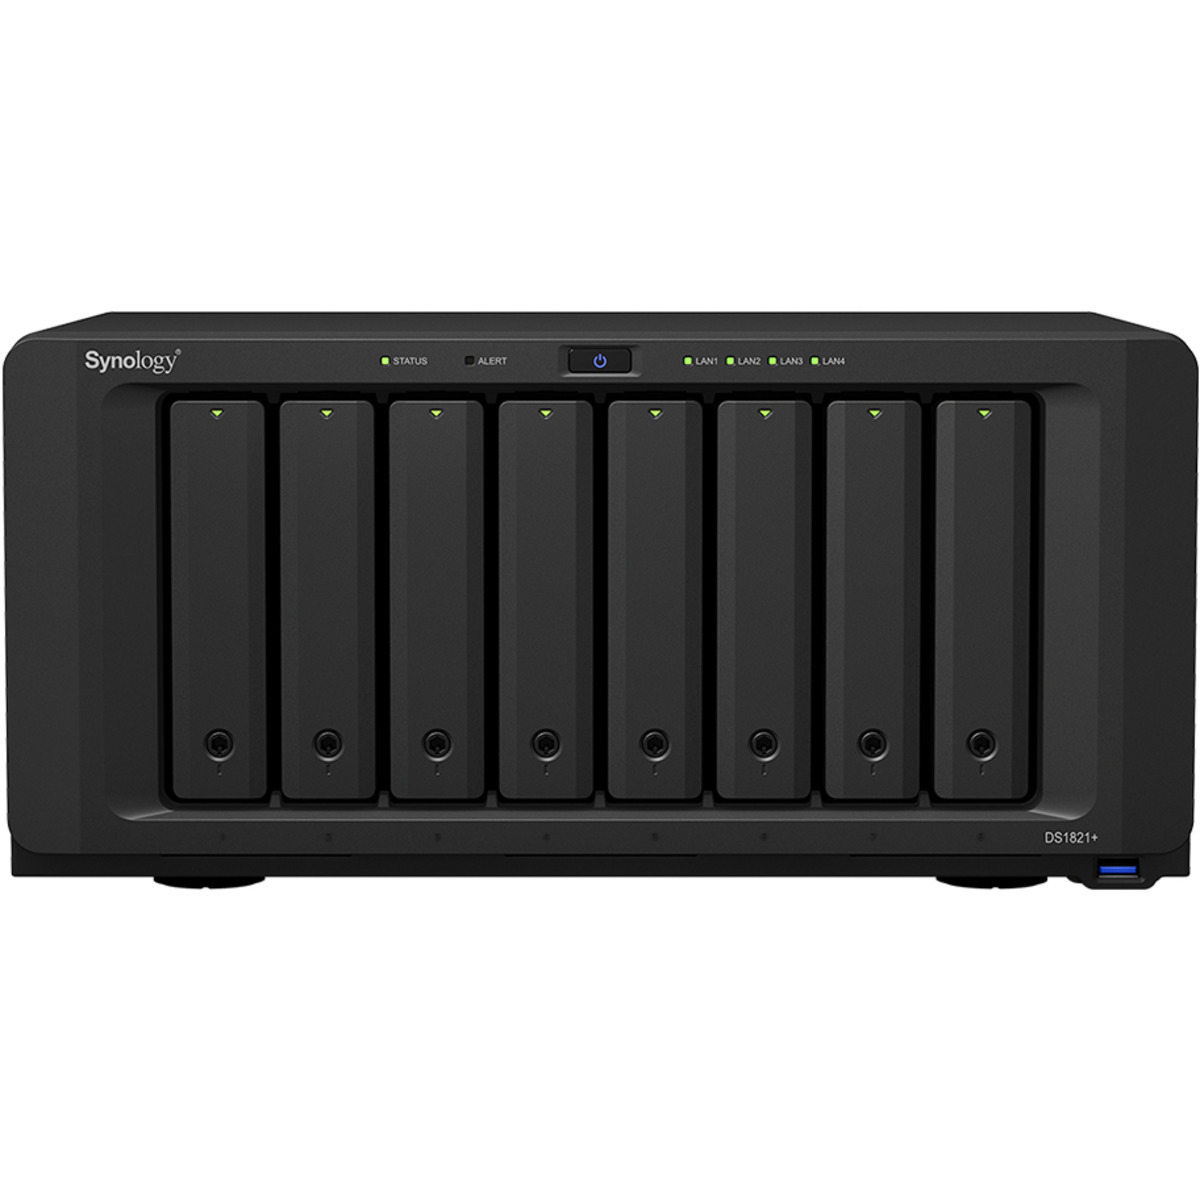 Synology DiskStation DS1821+ 11.5tb 8-Bay Desktop Multimedia / Power User / Business NAS - Network Attached Storage Device 6x1.9tb Synology SAT5210 Series SAT5210-1920G 2.5 530/500MB/s SATA 6Gb/s SSD ENTERPRISE Class Drives Installed - Burn-In Tested - FREE RAM UPGRADE DiskStation DS1821+